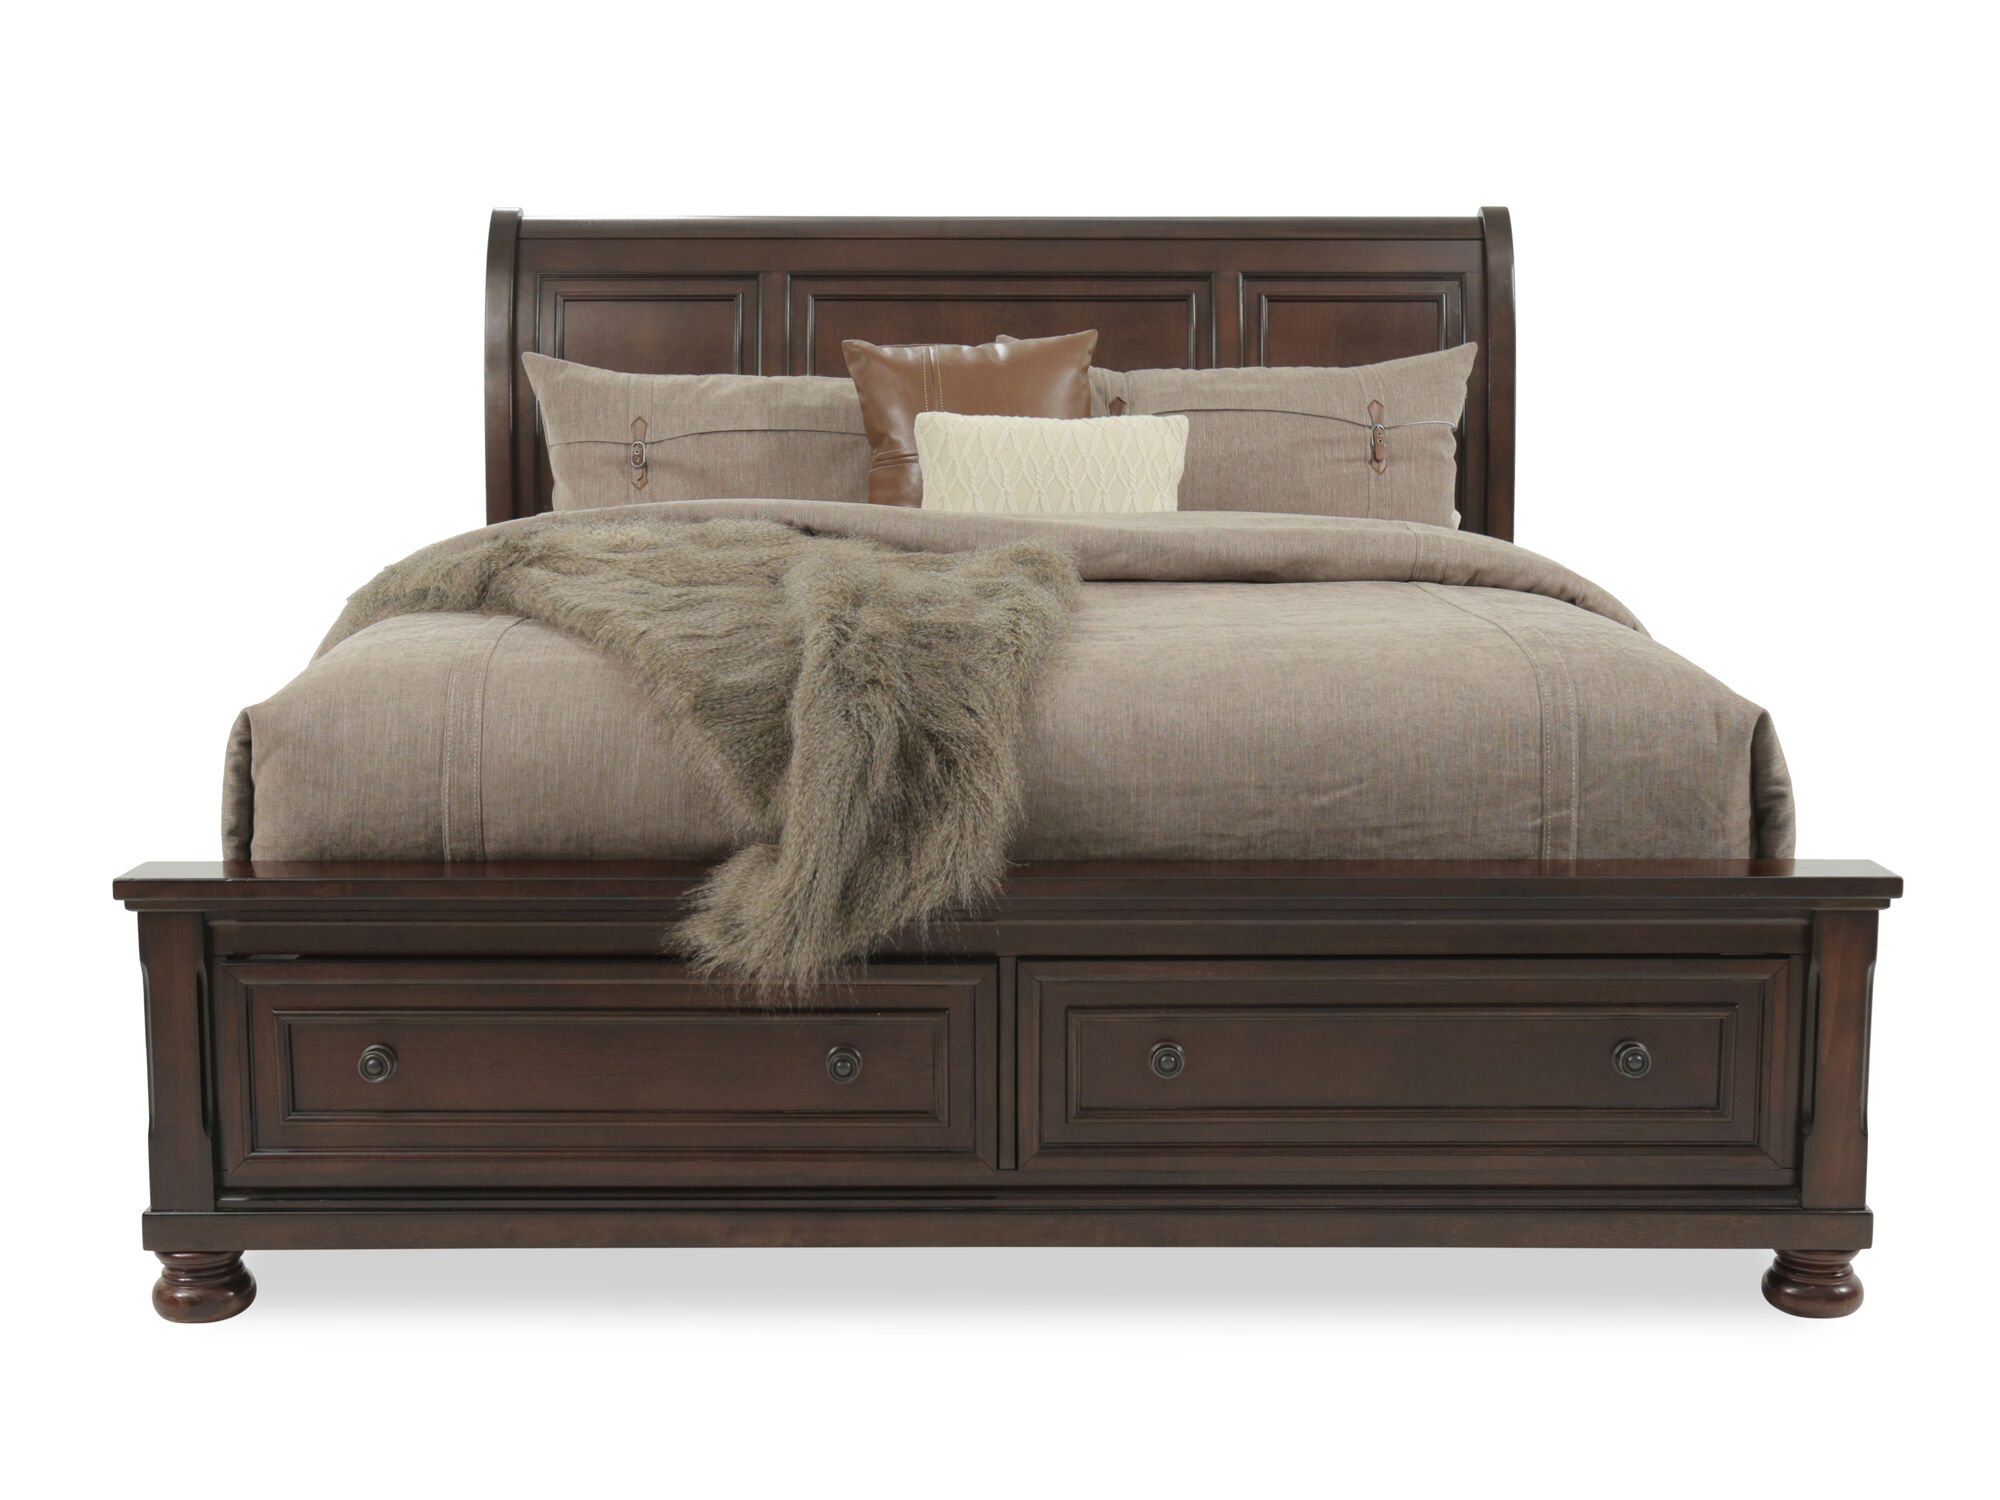 57 Traditional Beveled Sleigh Bed In, Ashley King Size Sleigh Bed